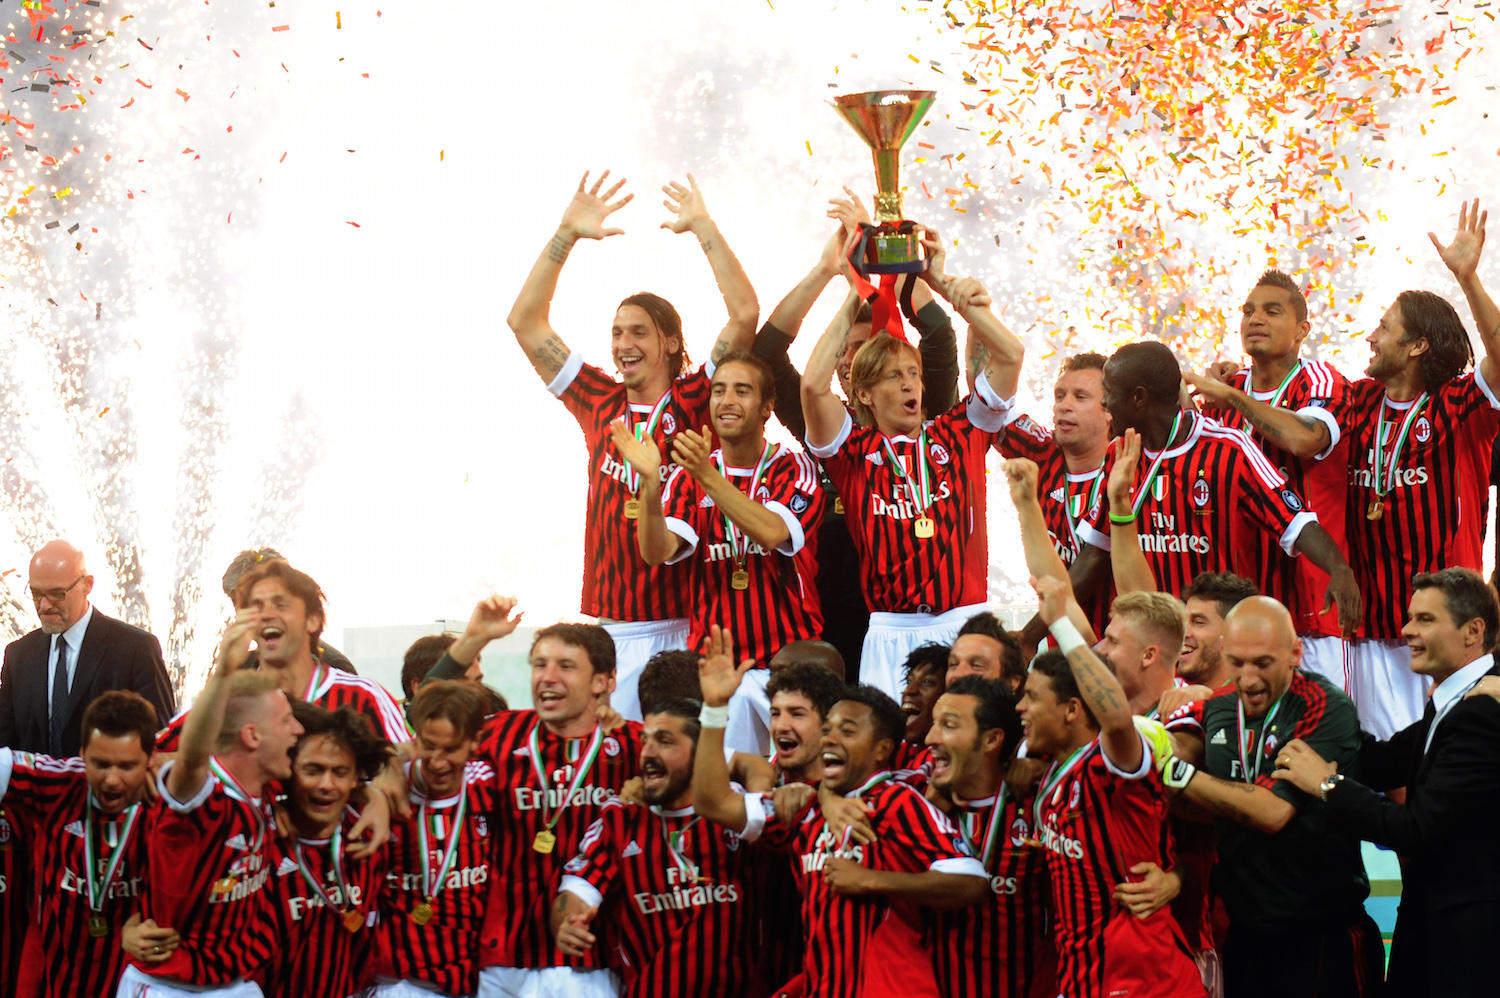 AC Milan celebrate a Supercoppa success. | GIUSEPPE CACACE/AFP/Getty Images